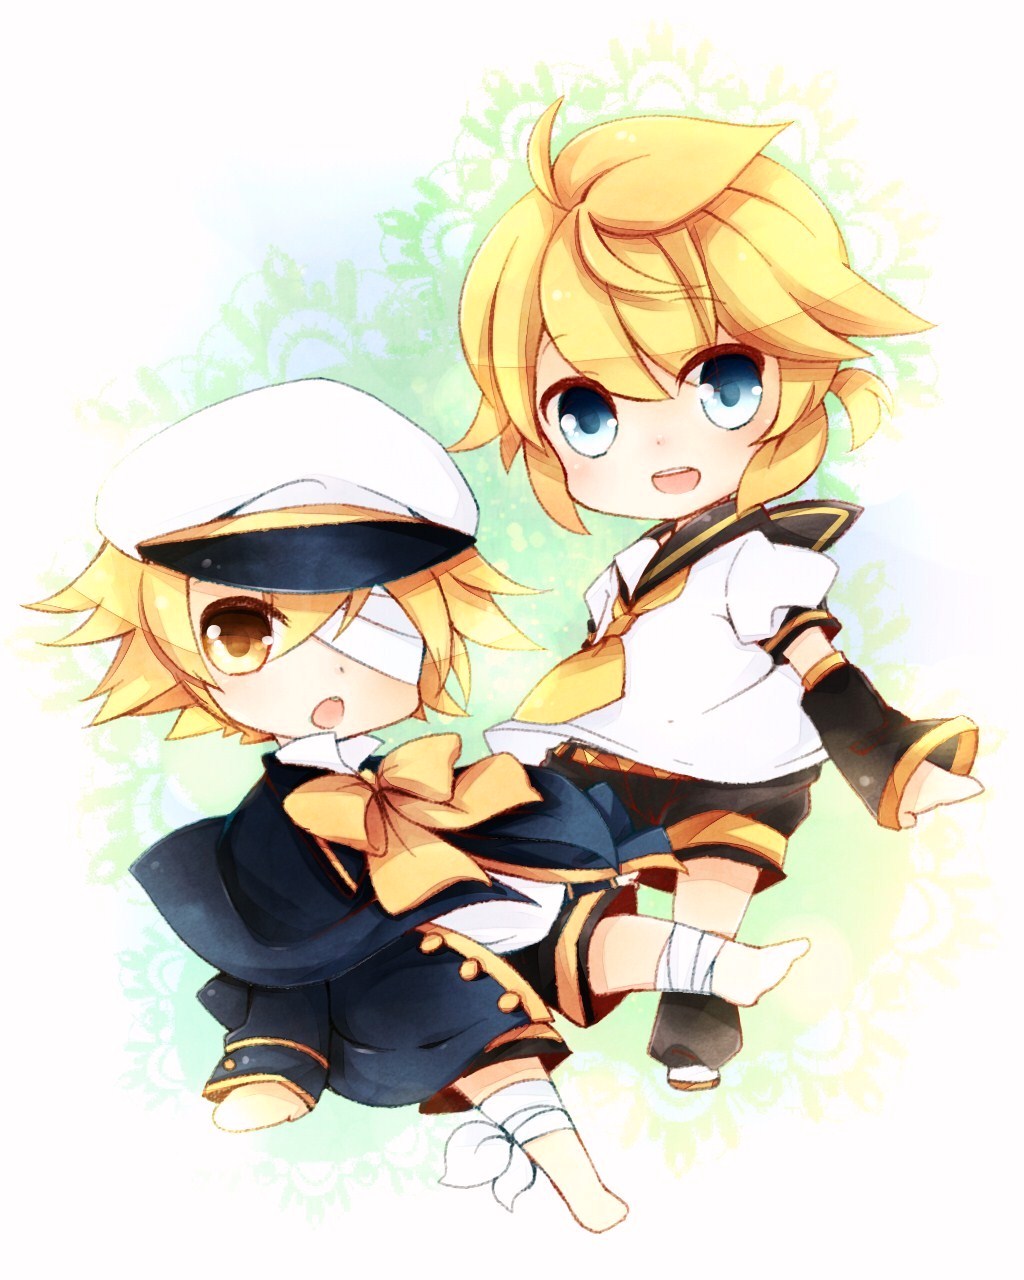 Oliver and Kagamine Len by Sum